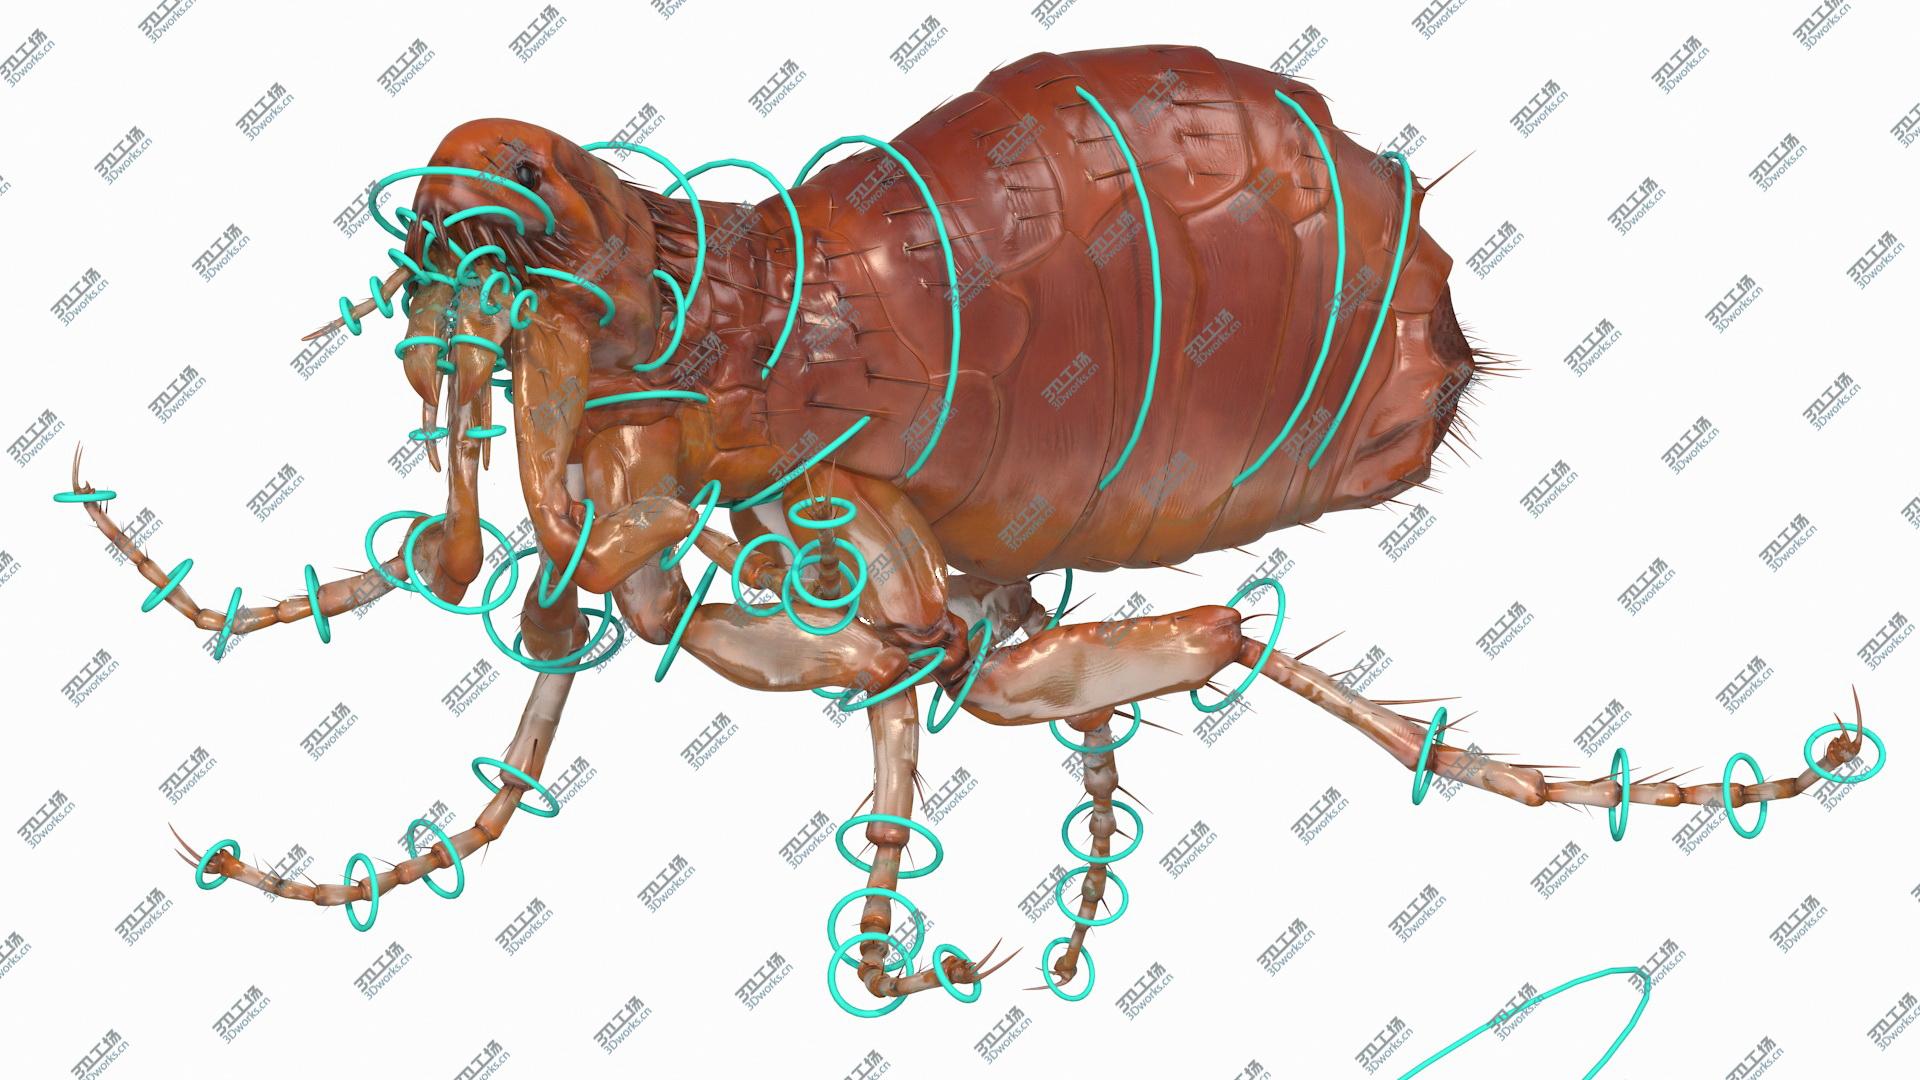 images/goods_img/202104093/3D Flea Insect Rigged model/5.jpg